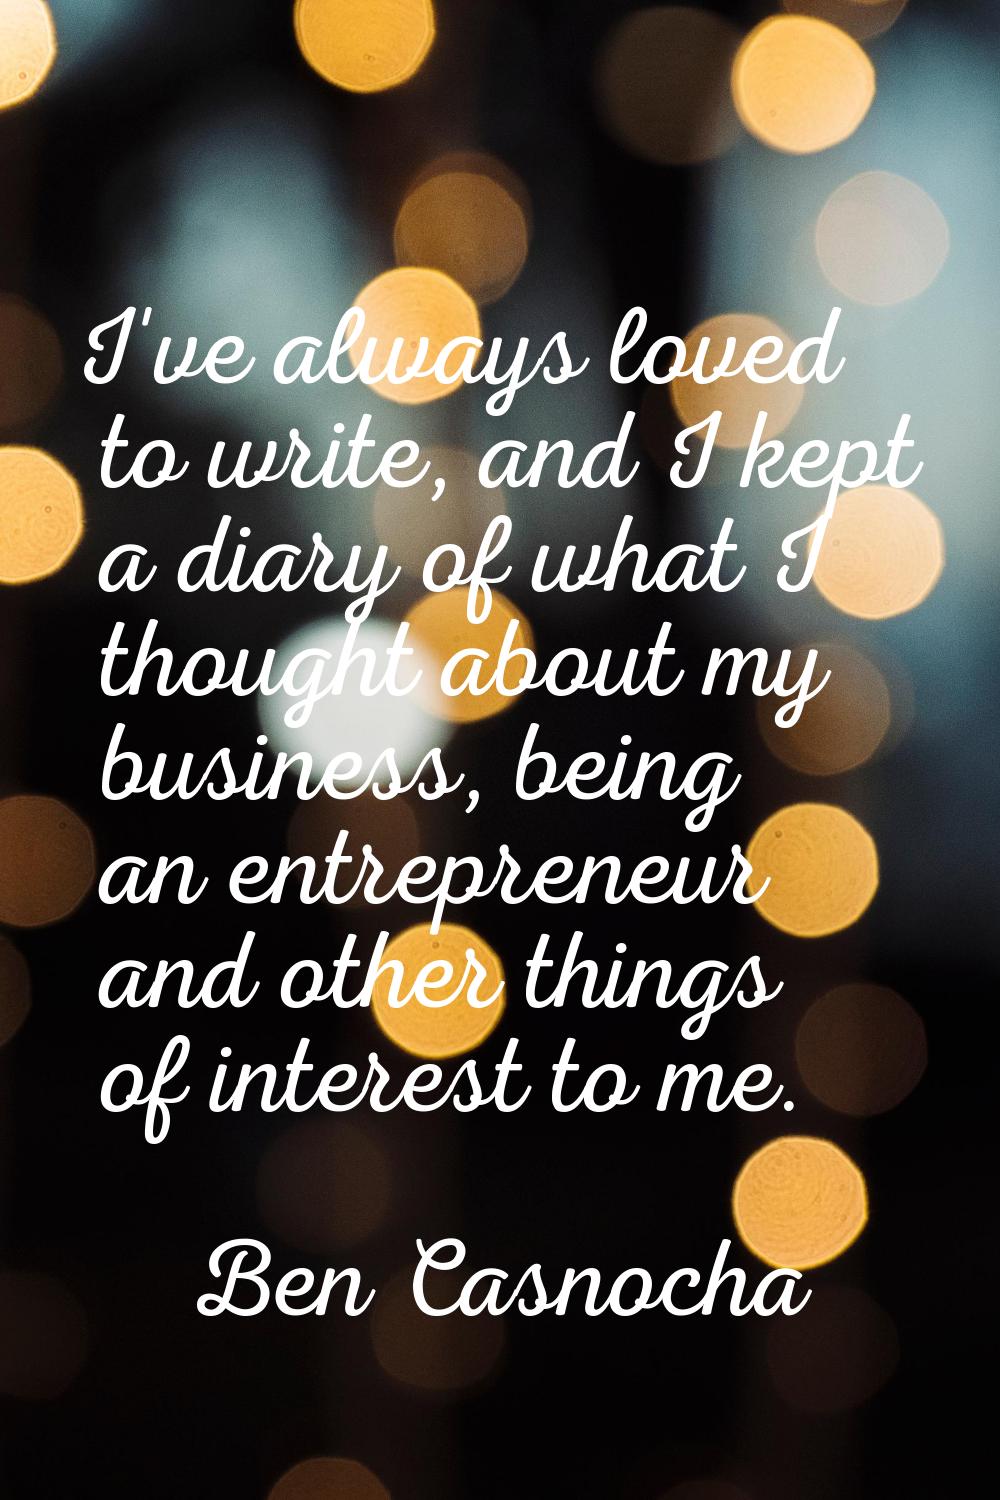 I've always loved to write, and I kept a diary of what I thought about my business, being an entrep